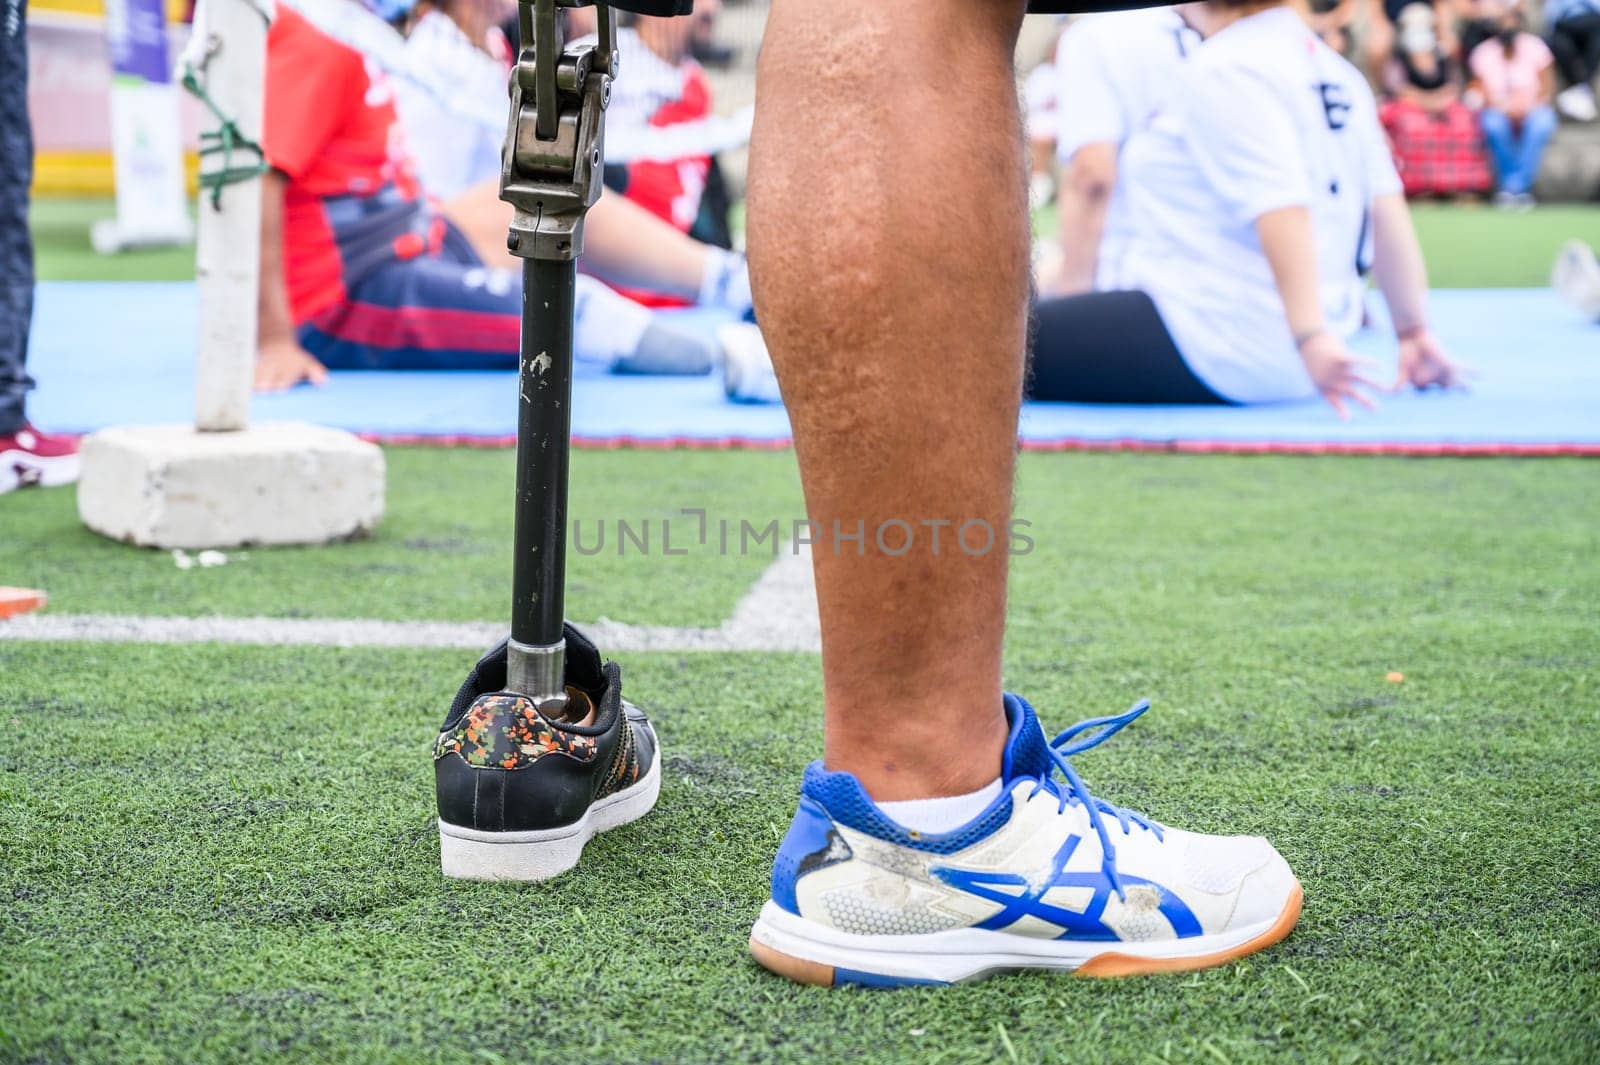 Unrecognizable male athlete with a prosthetic leg. by Peruphotoart